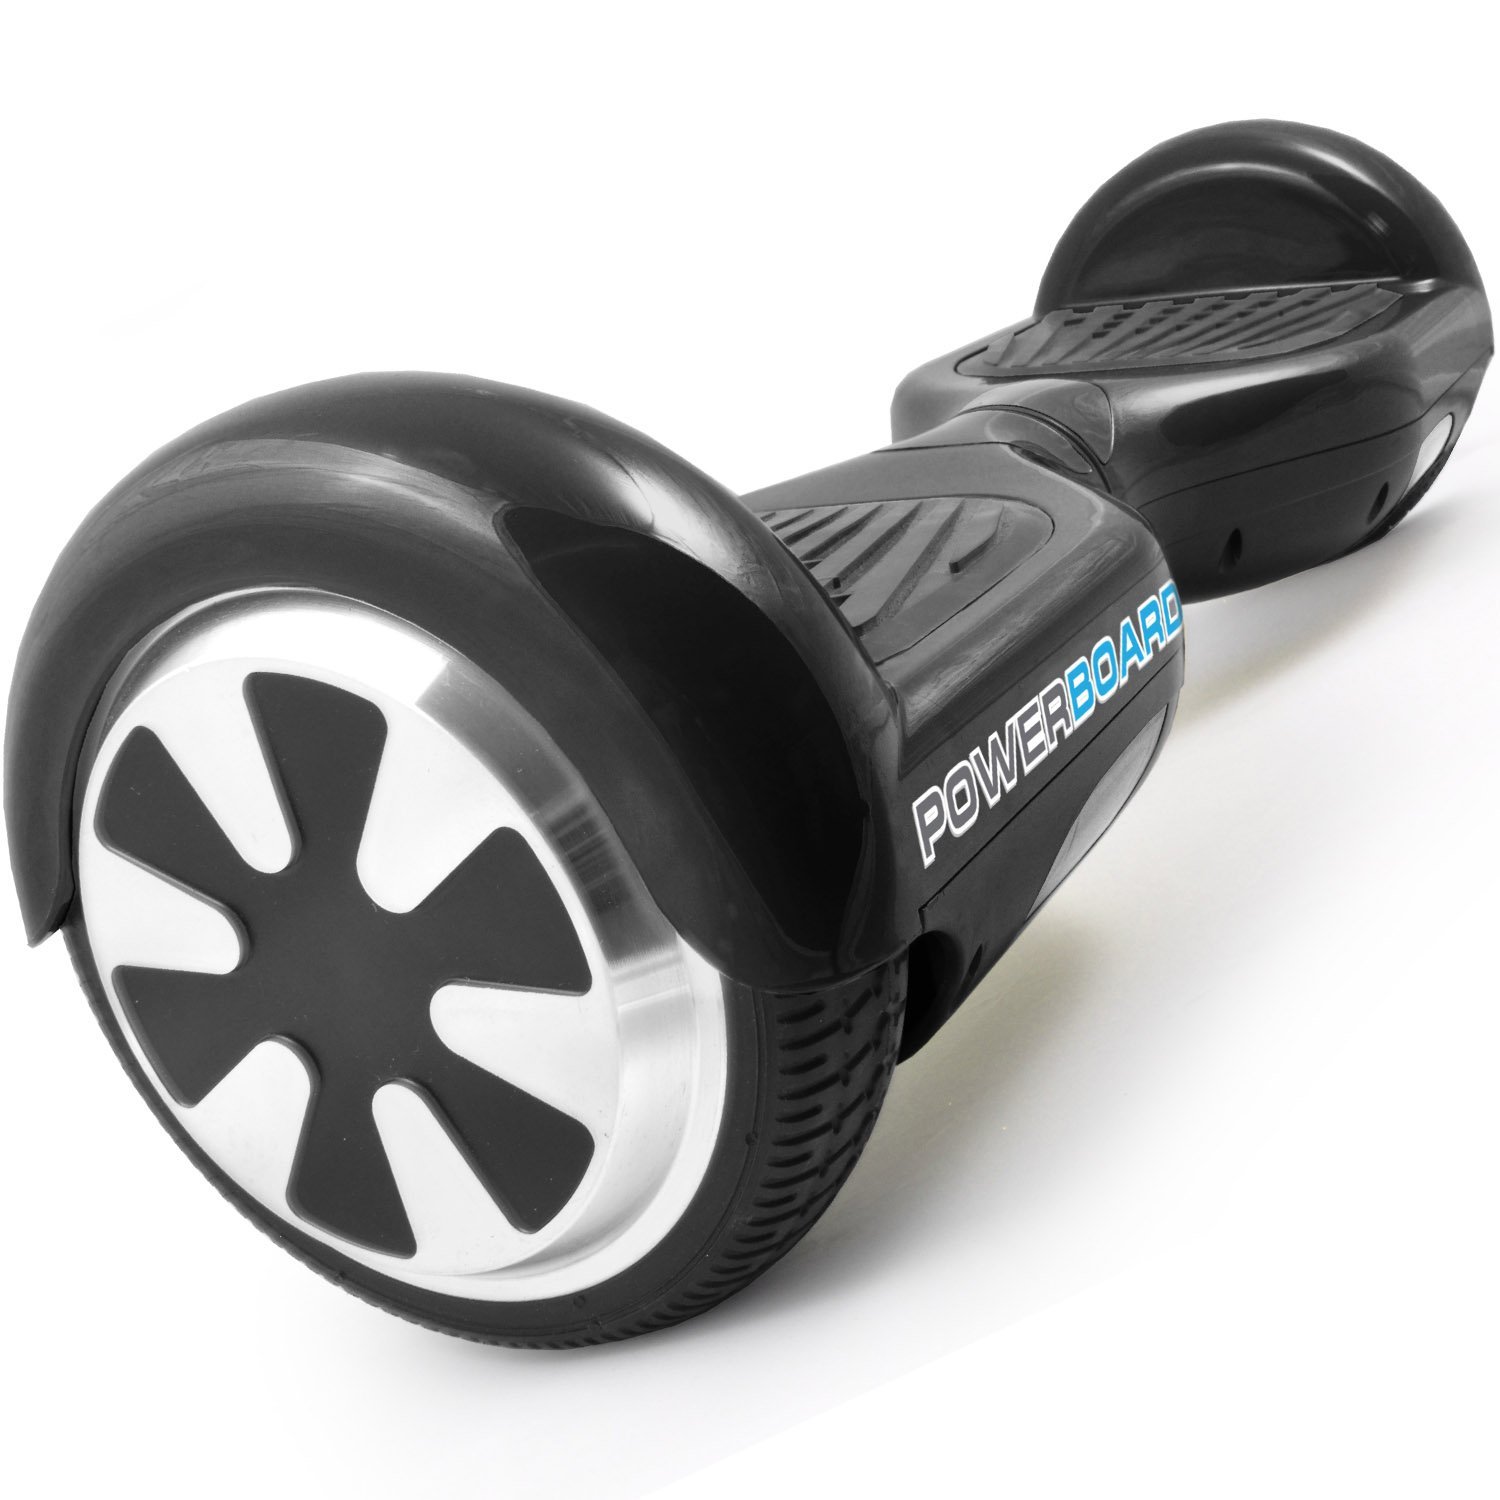 What Hoverboards Say about Our Hardware Future